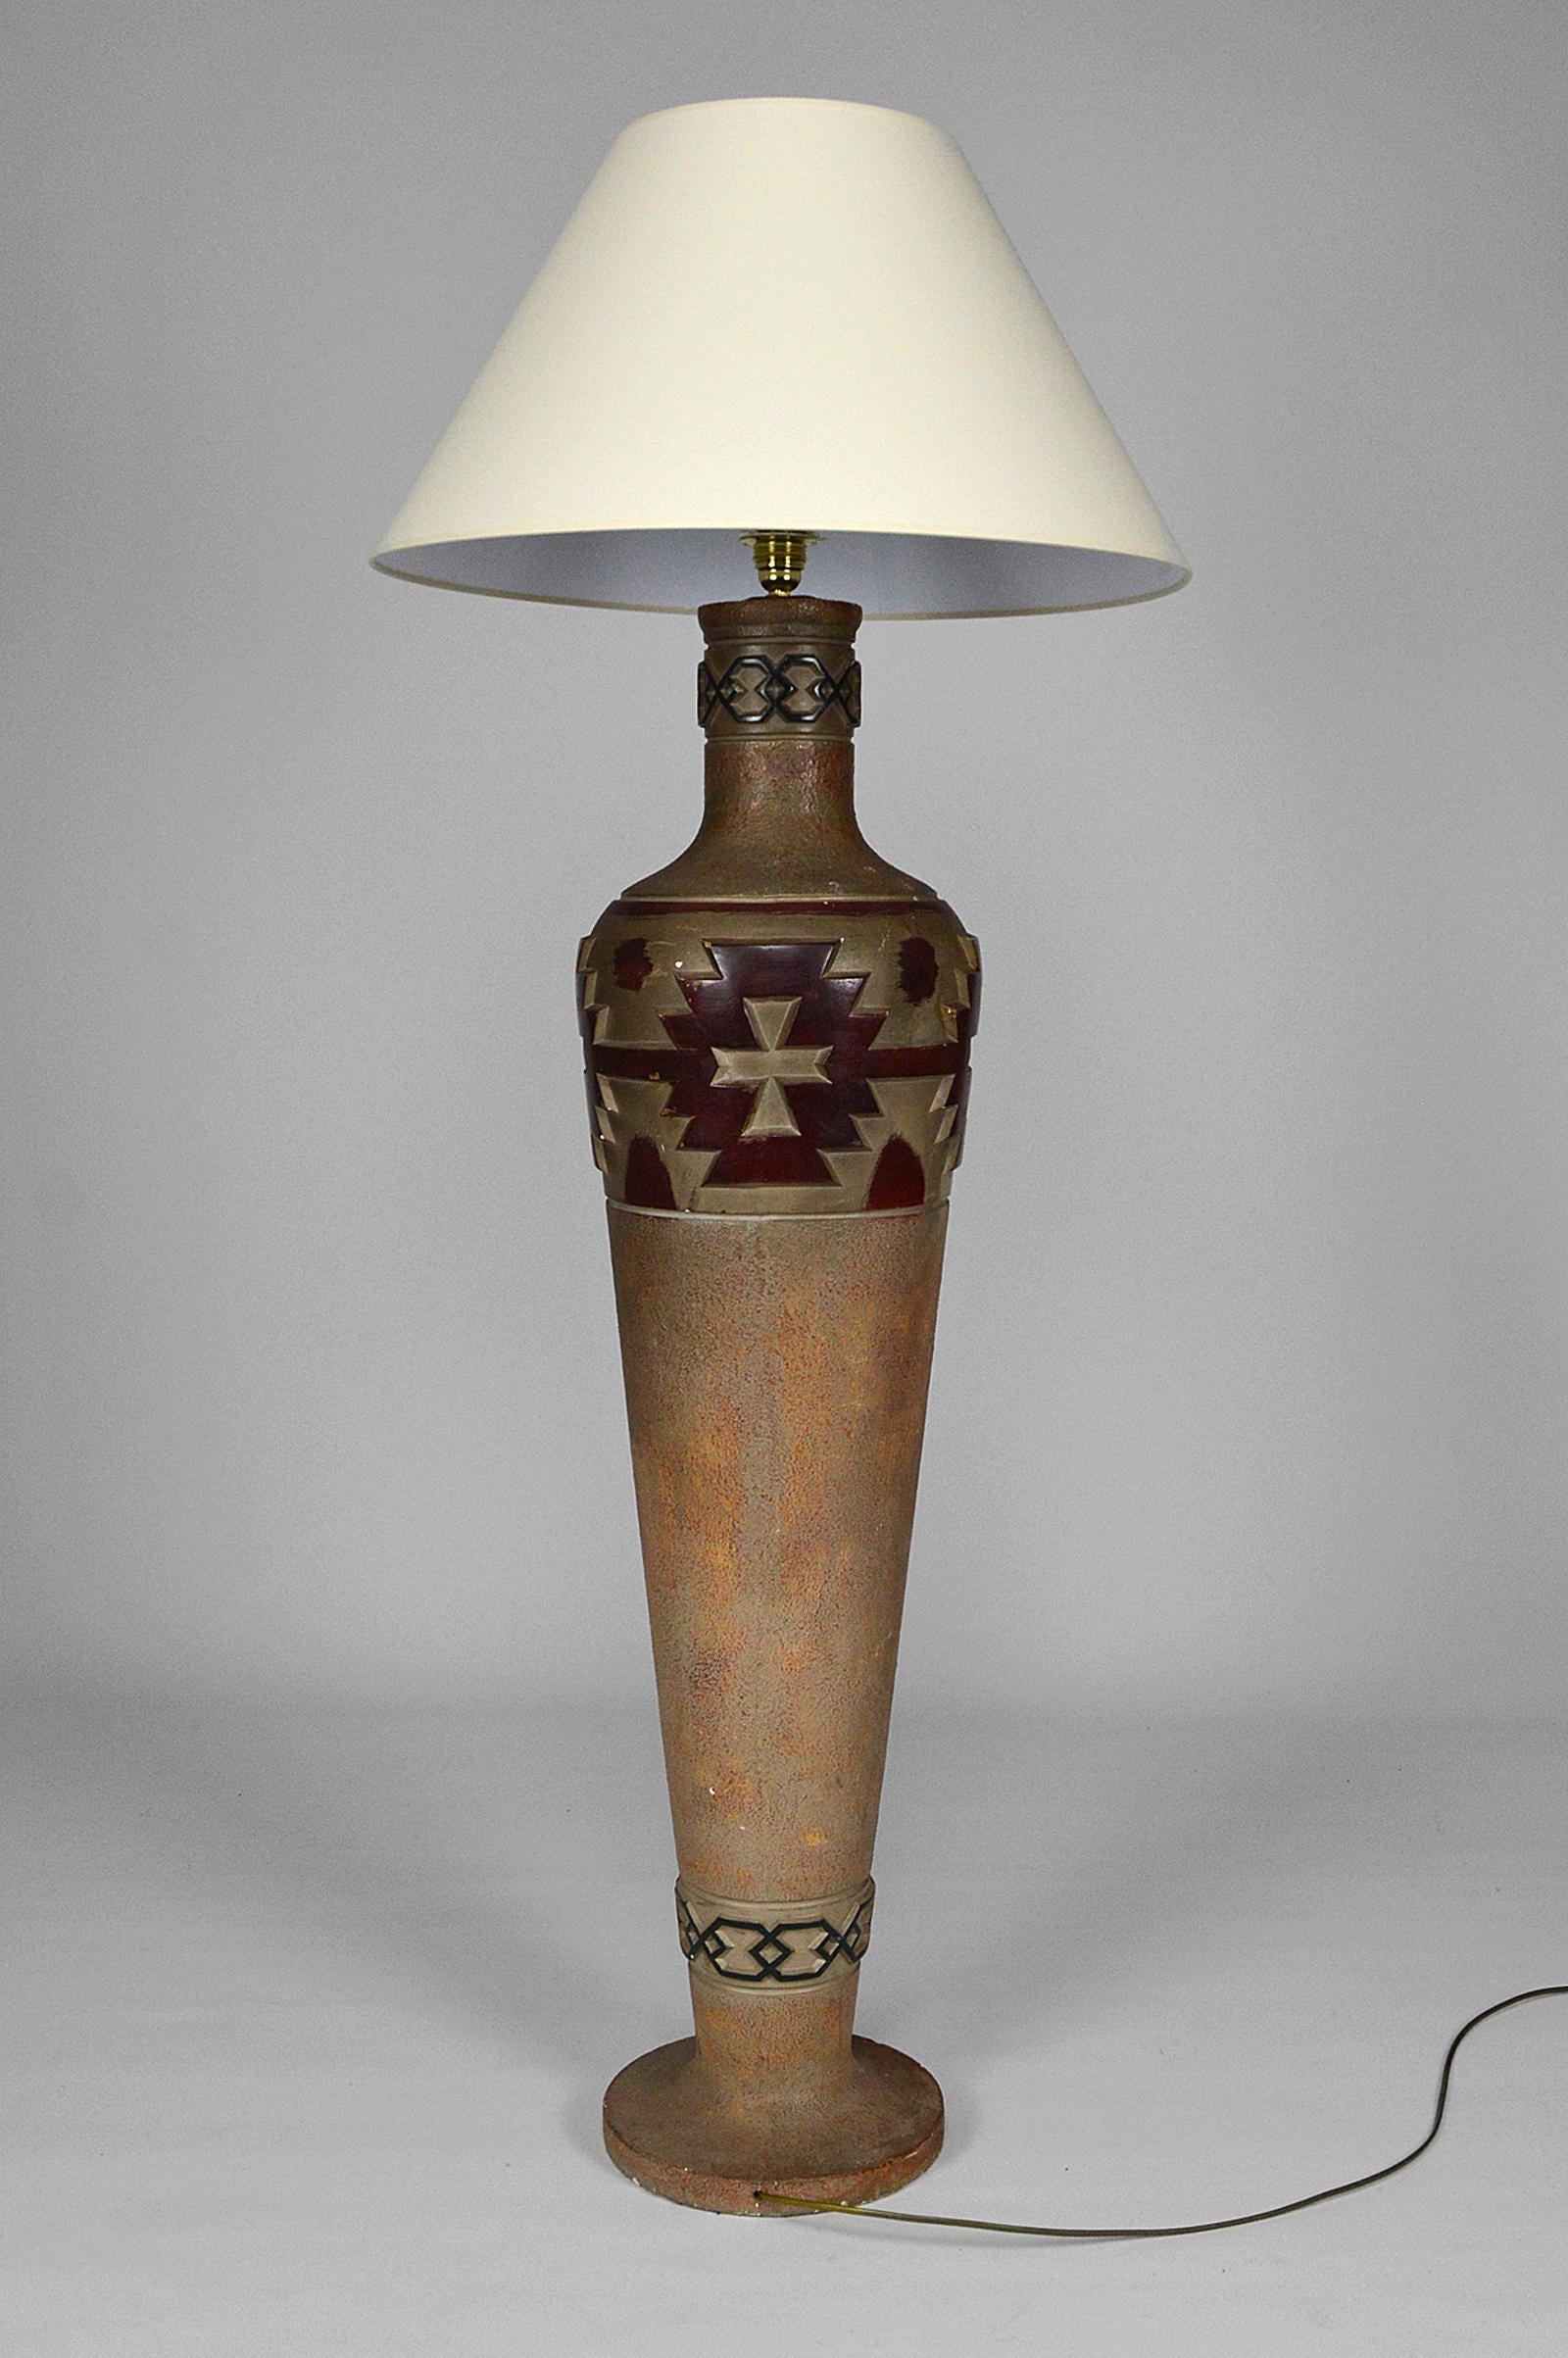 Floor lamp in the form of pottery / urn / vase.
Bohemian / Monterey /Indian / Navajo / Native American Southwestern style, circa 1970.
Good general condition, rewired.